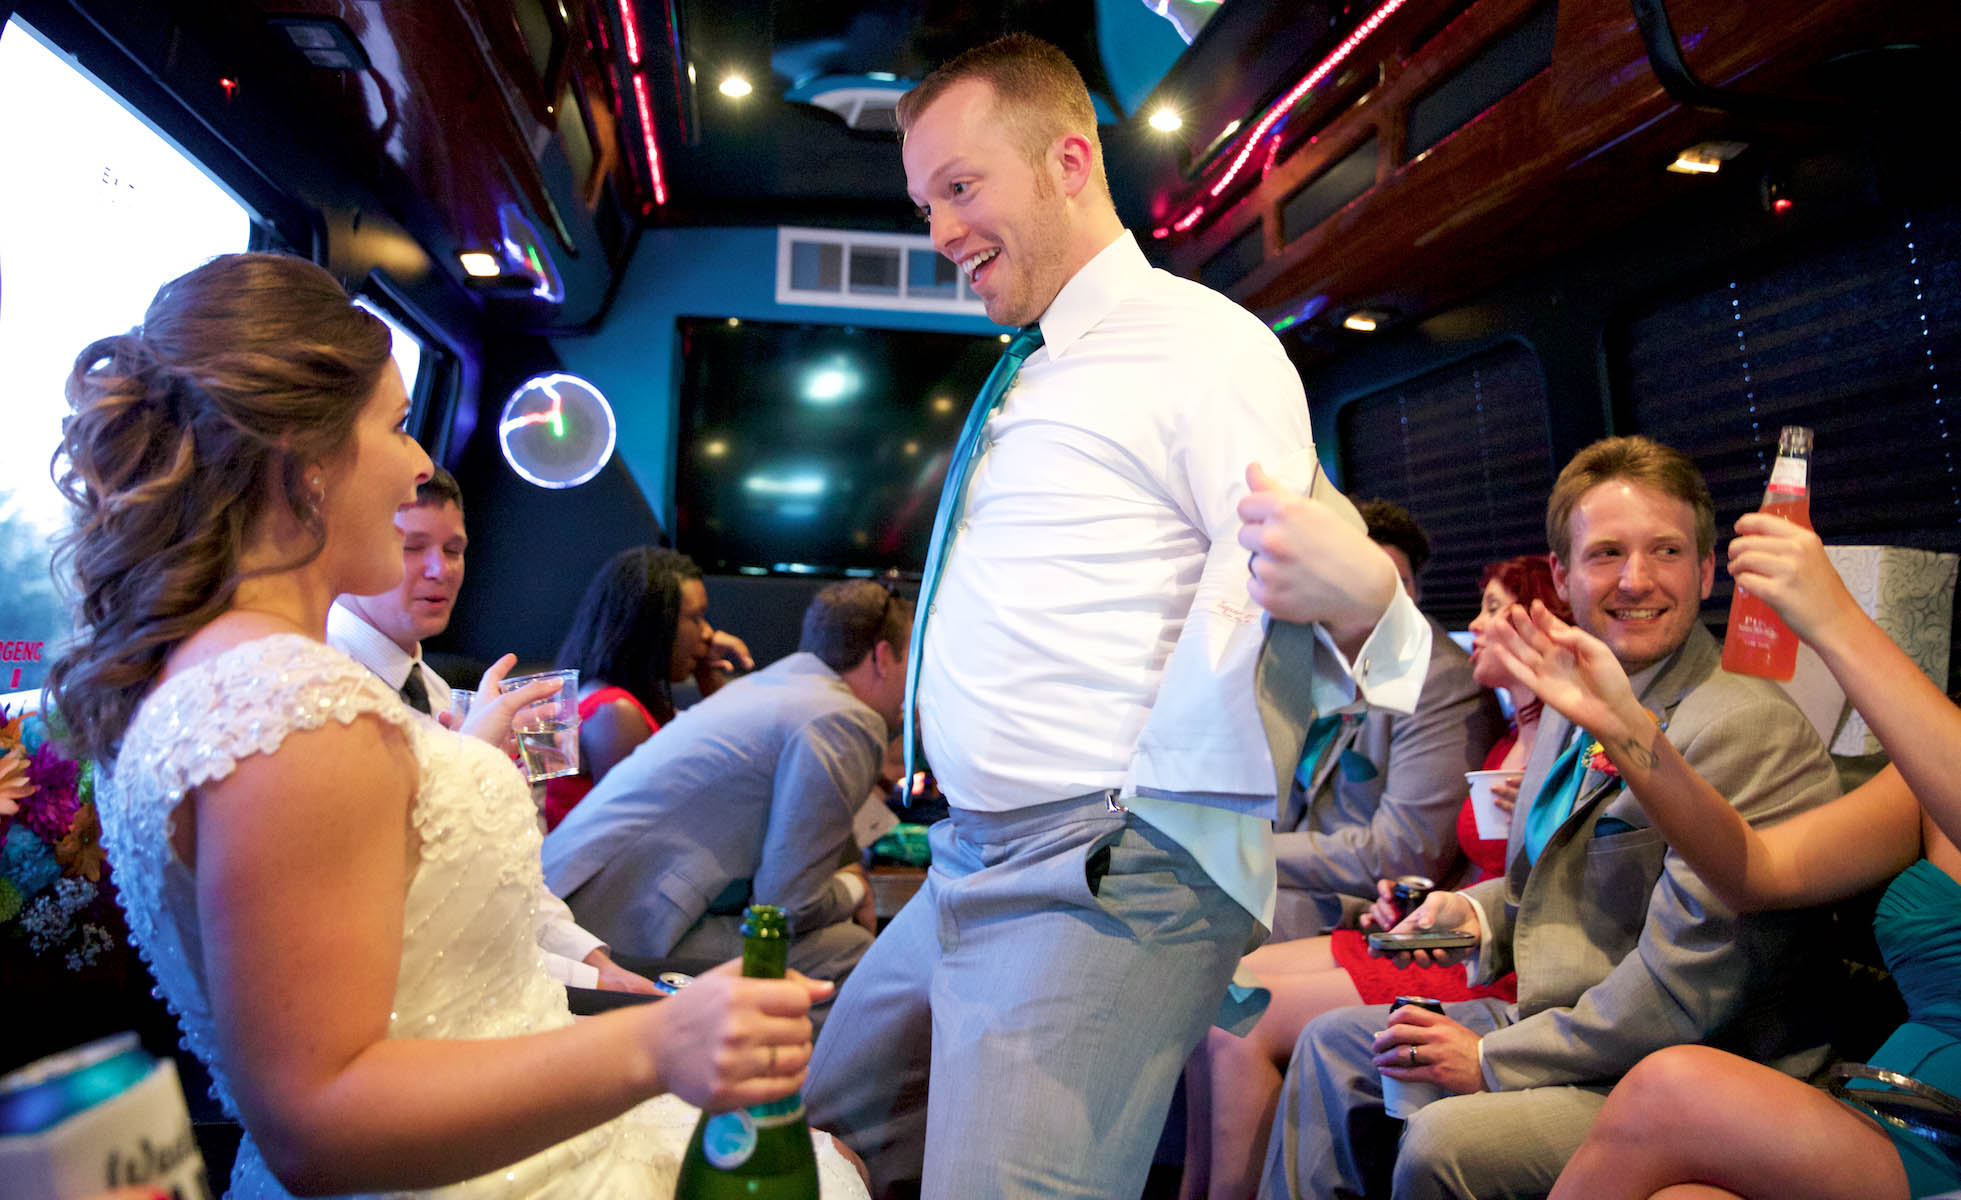 Ben has fun with Alissa on the party bus. Wedding pictures by Tiffany & Steve of Warmowski Photography.